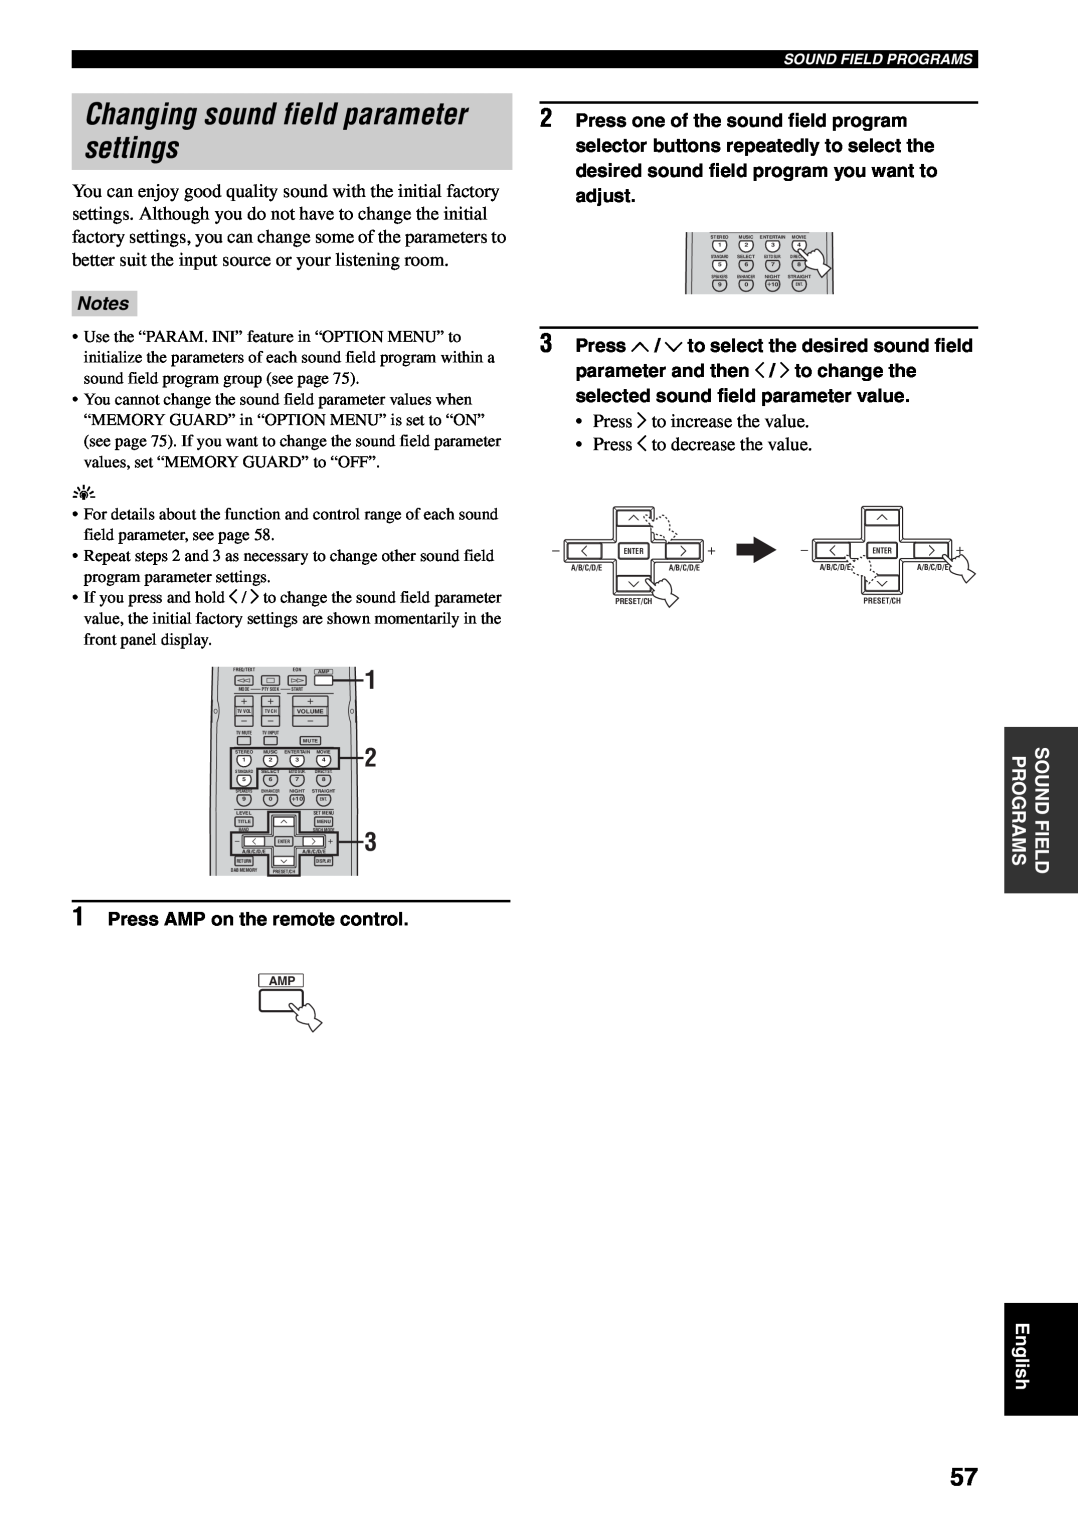 Yamaha RX-V459 owner manual settings, Changing sound field parameter, Notes 